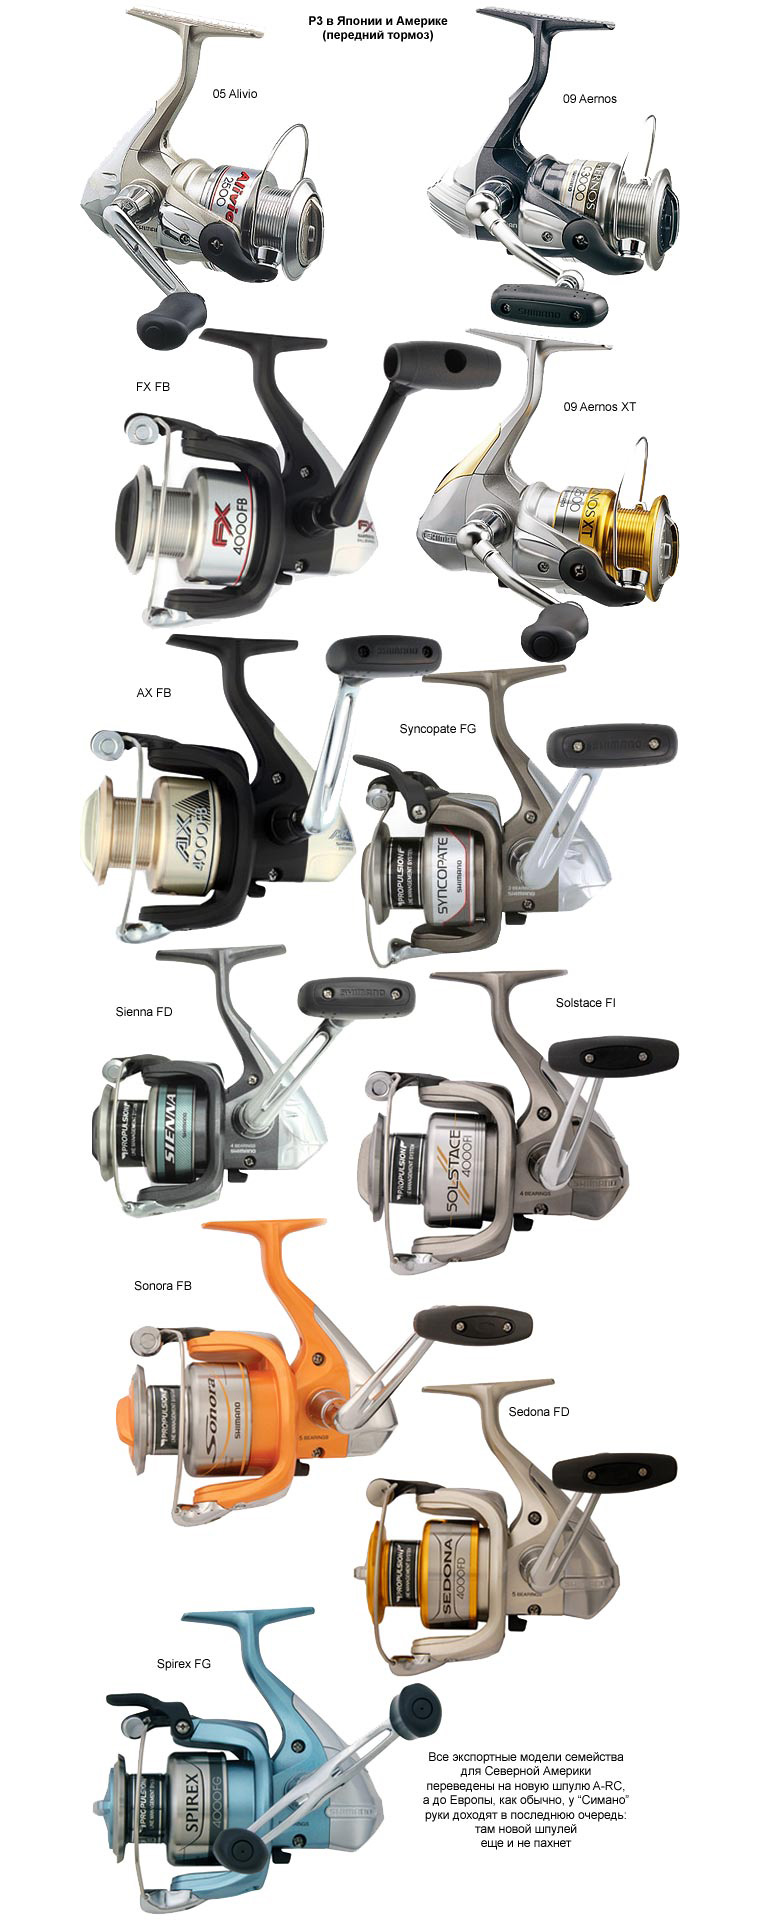 cheap shimano spinning reels of 2000s